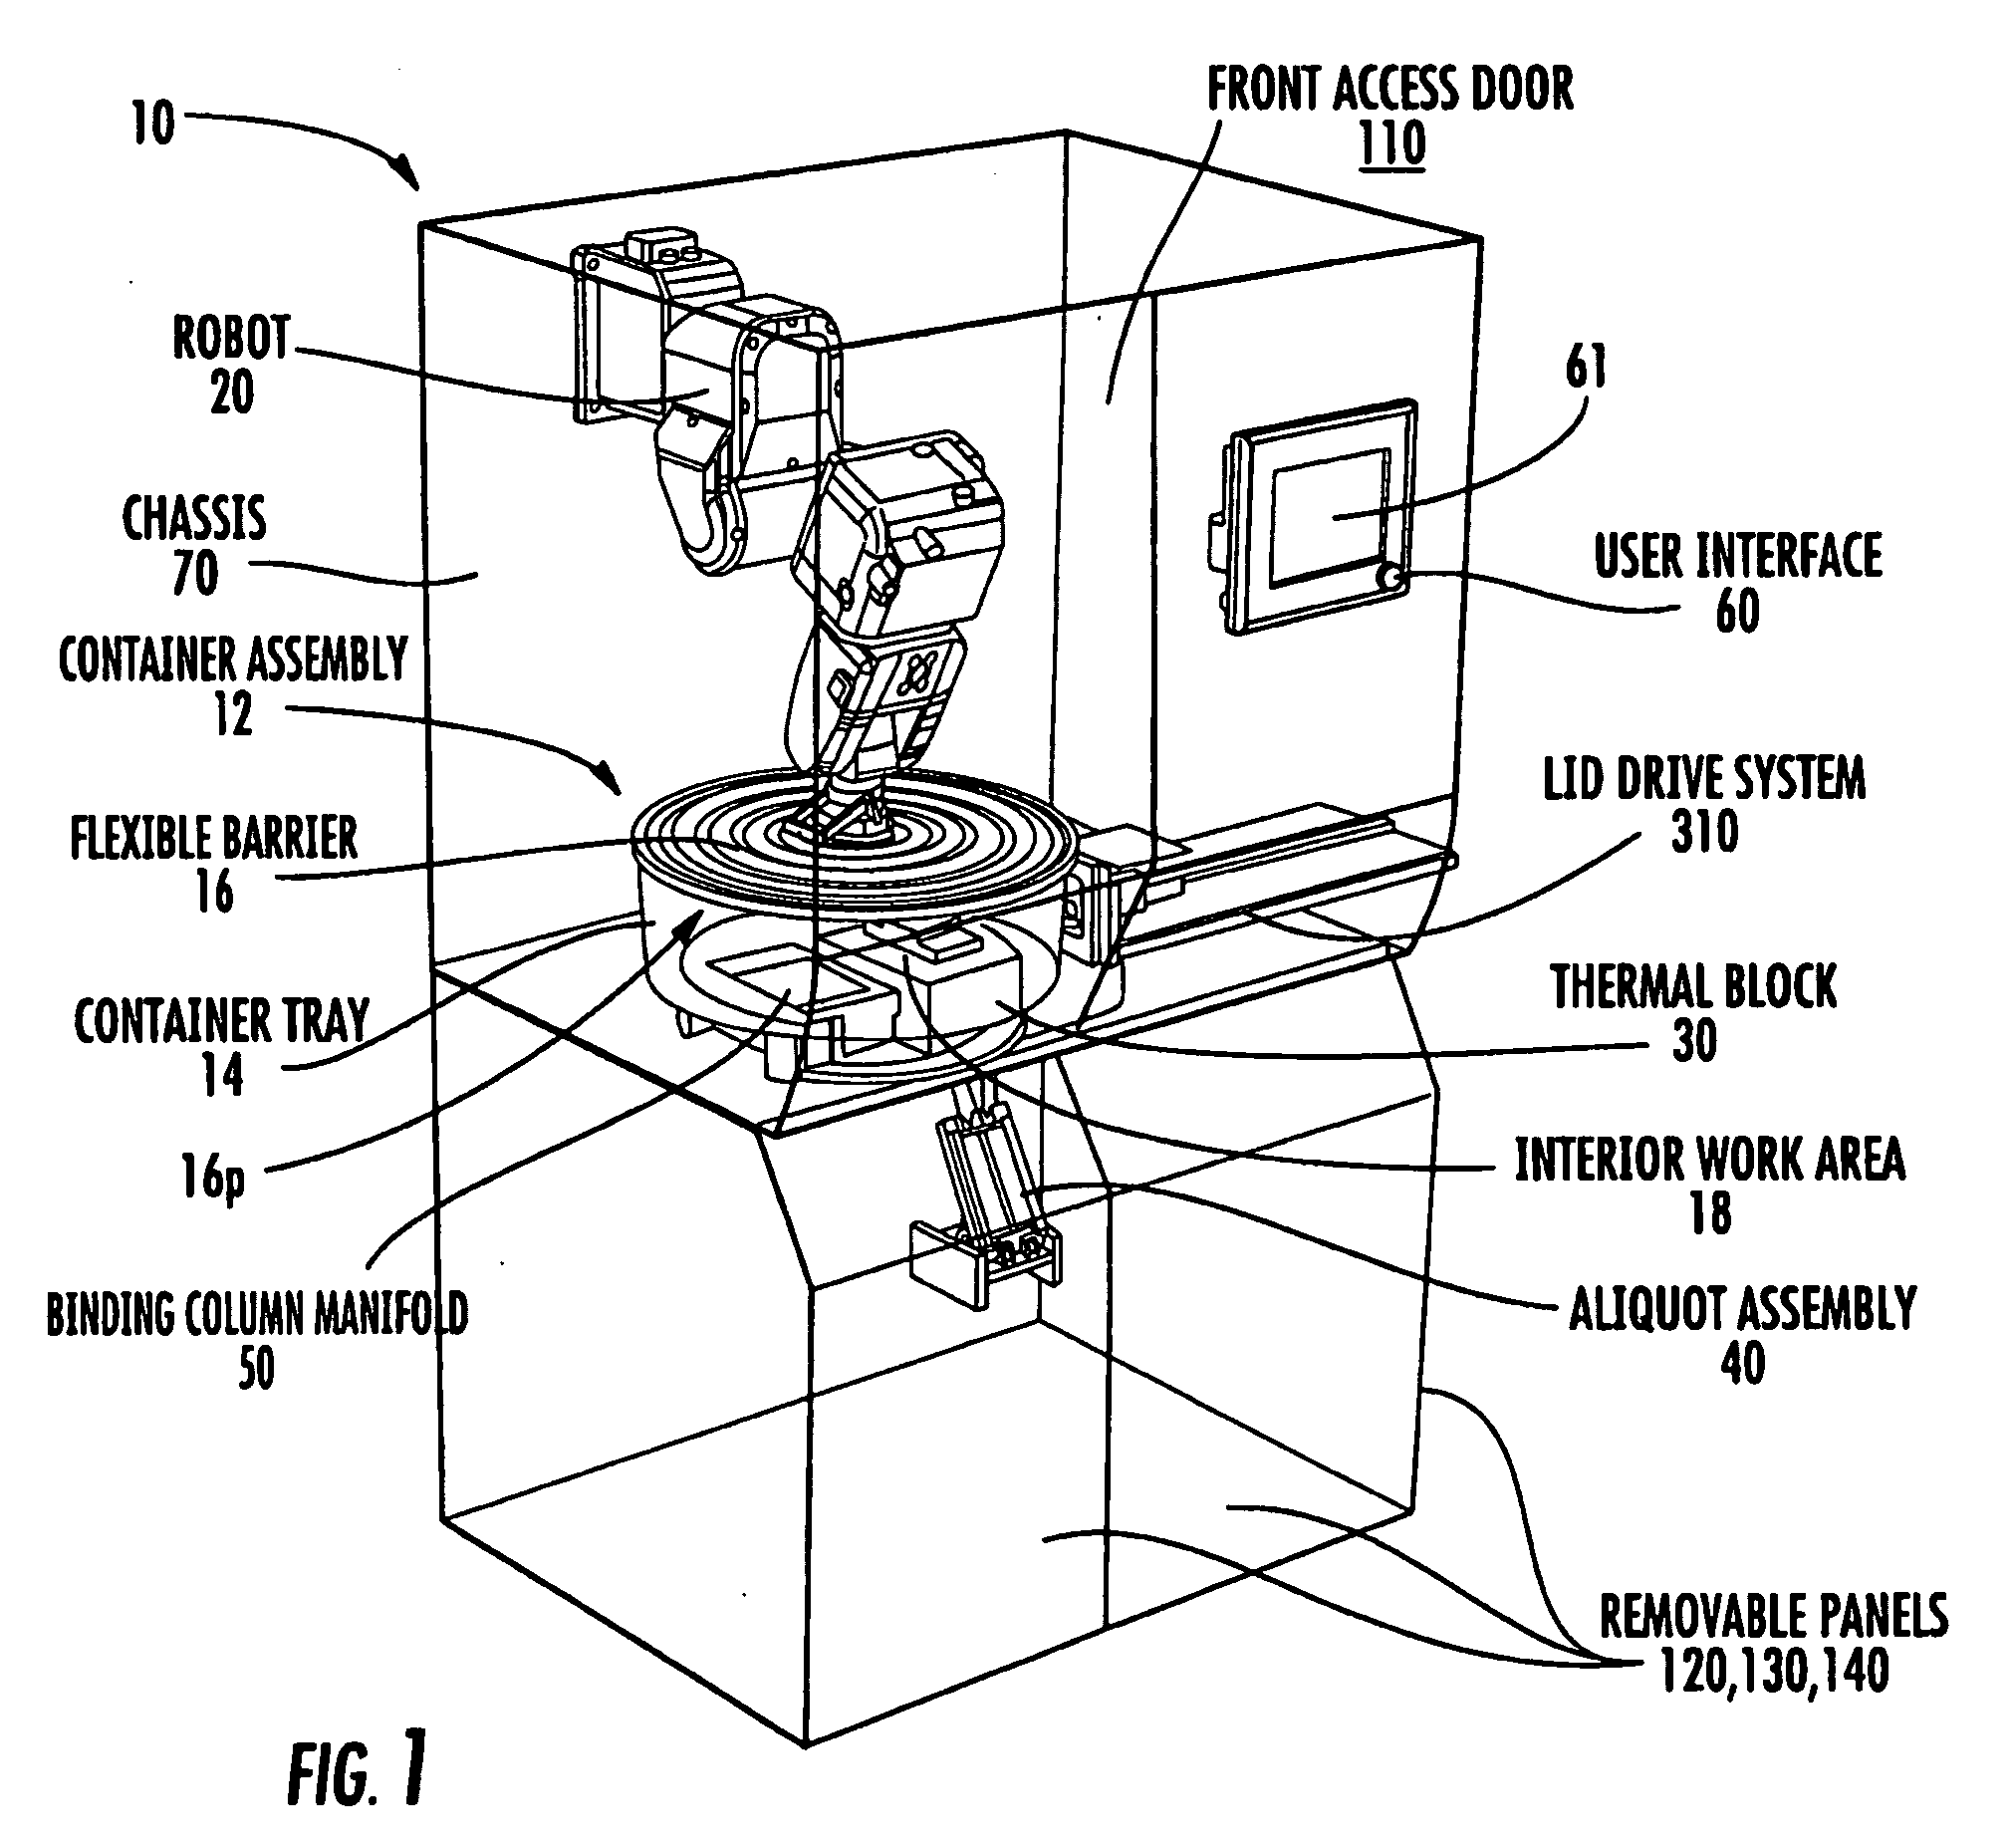 Systems and methods for processing samples in a closed container, and related devices